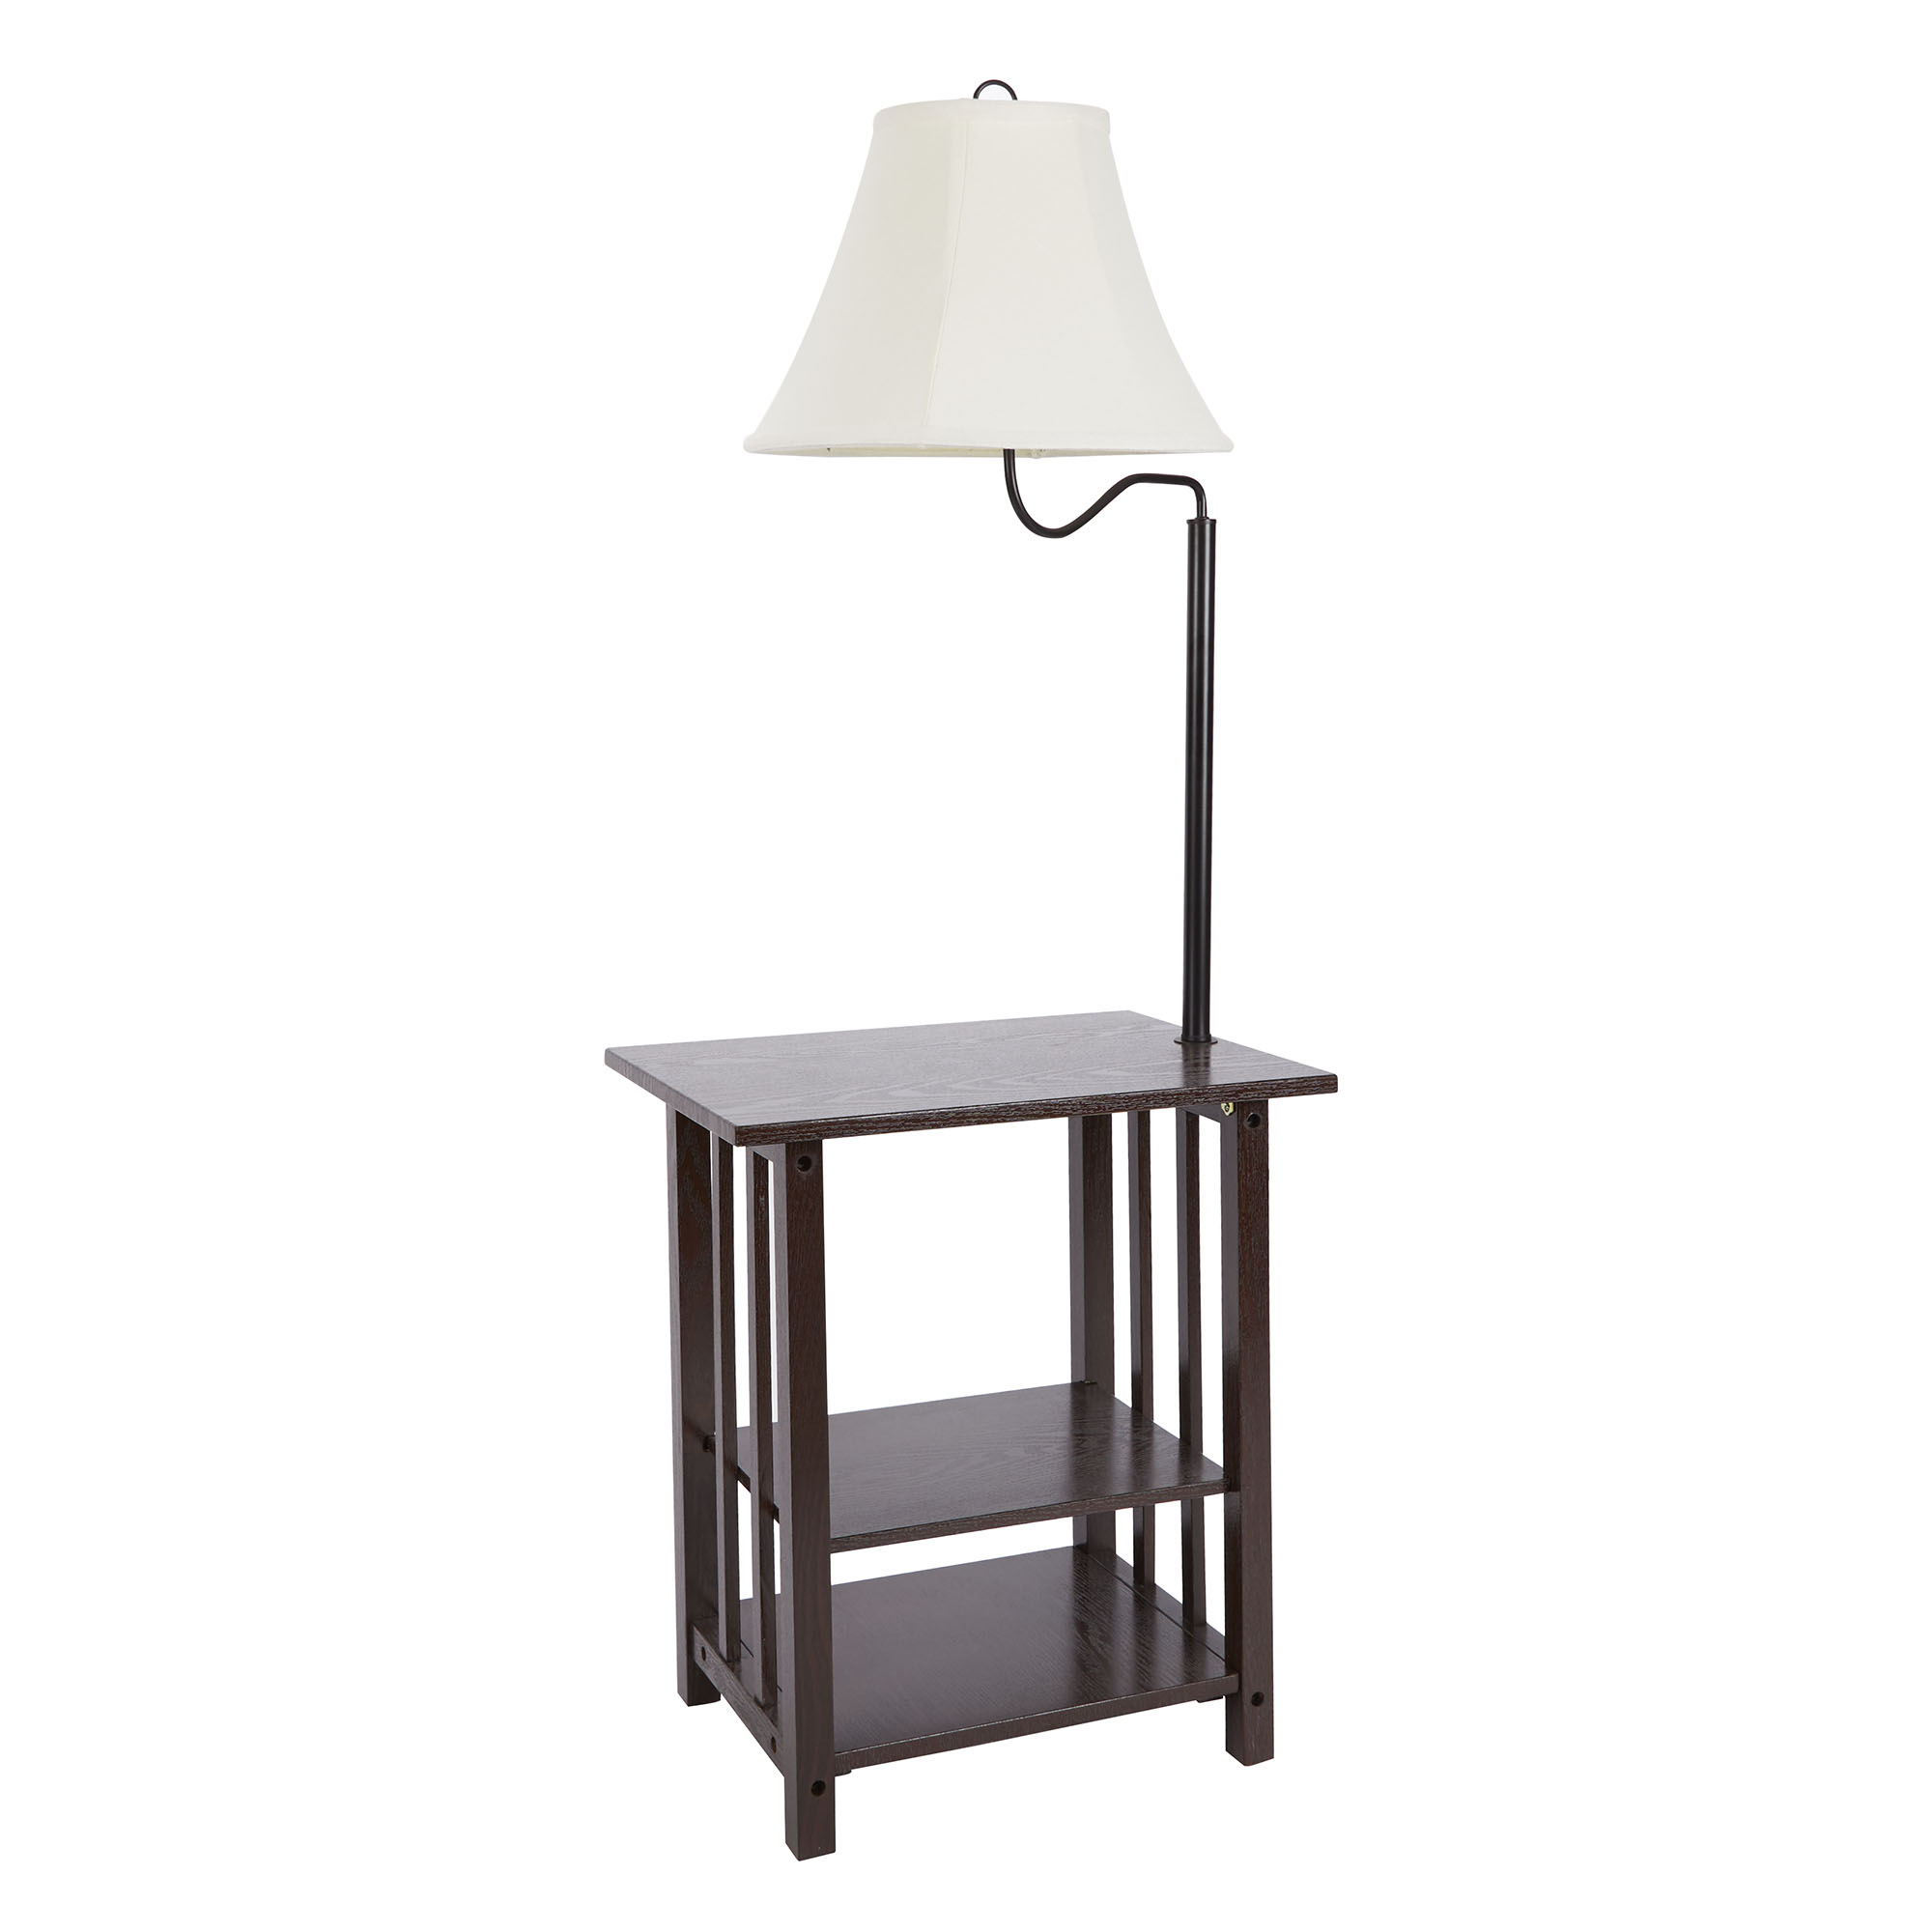 Details About Better Homes And Gardens 3 Rack End Table Floor Lamp Espresso Finish with regard to sizing 2000 X 2000